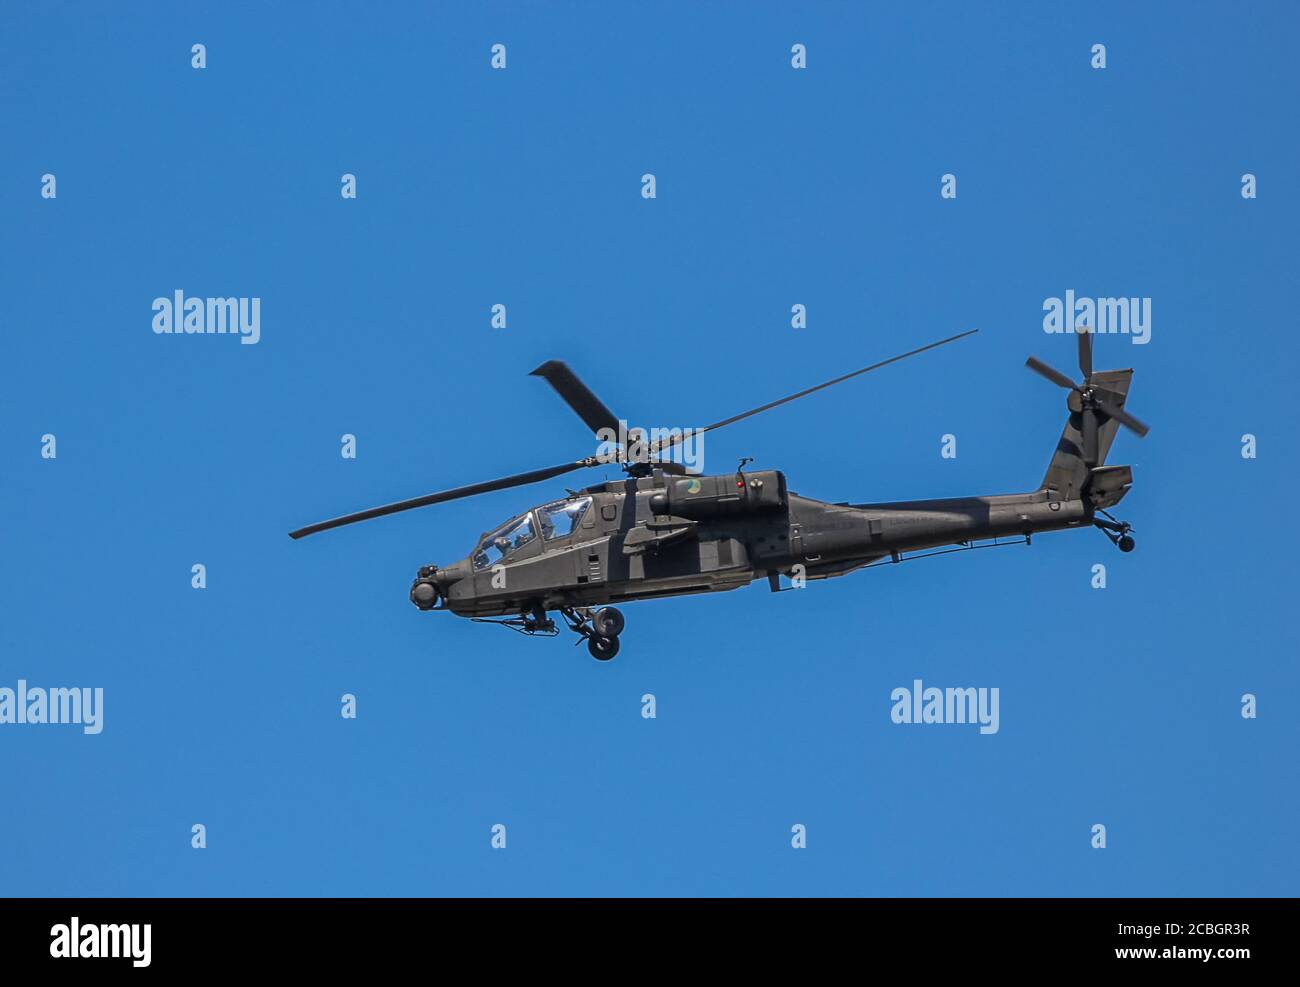 An AH-64D Apache Longbow attack helicopter Stock Photo